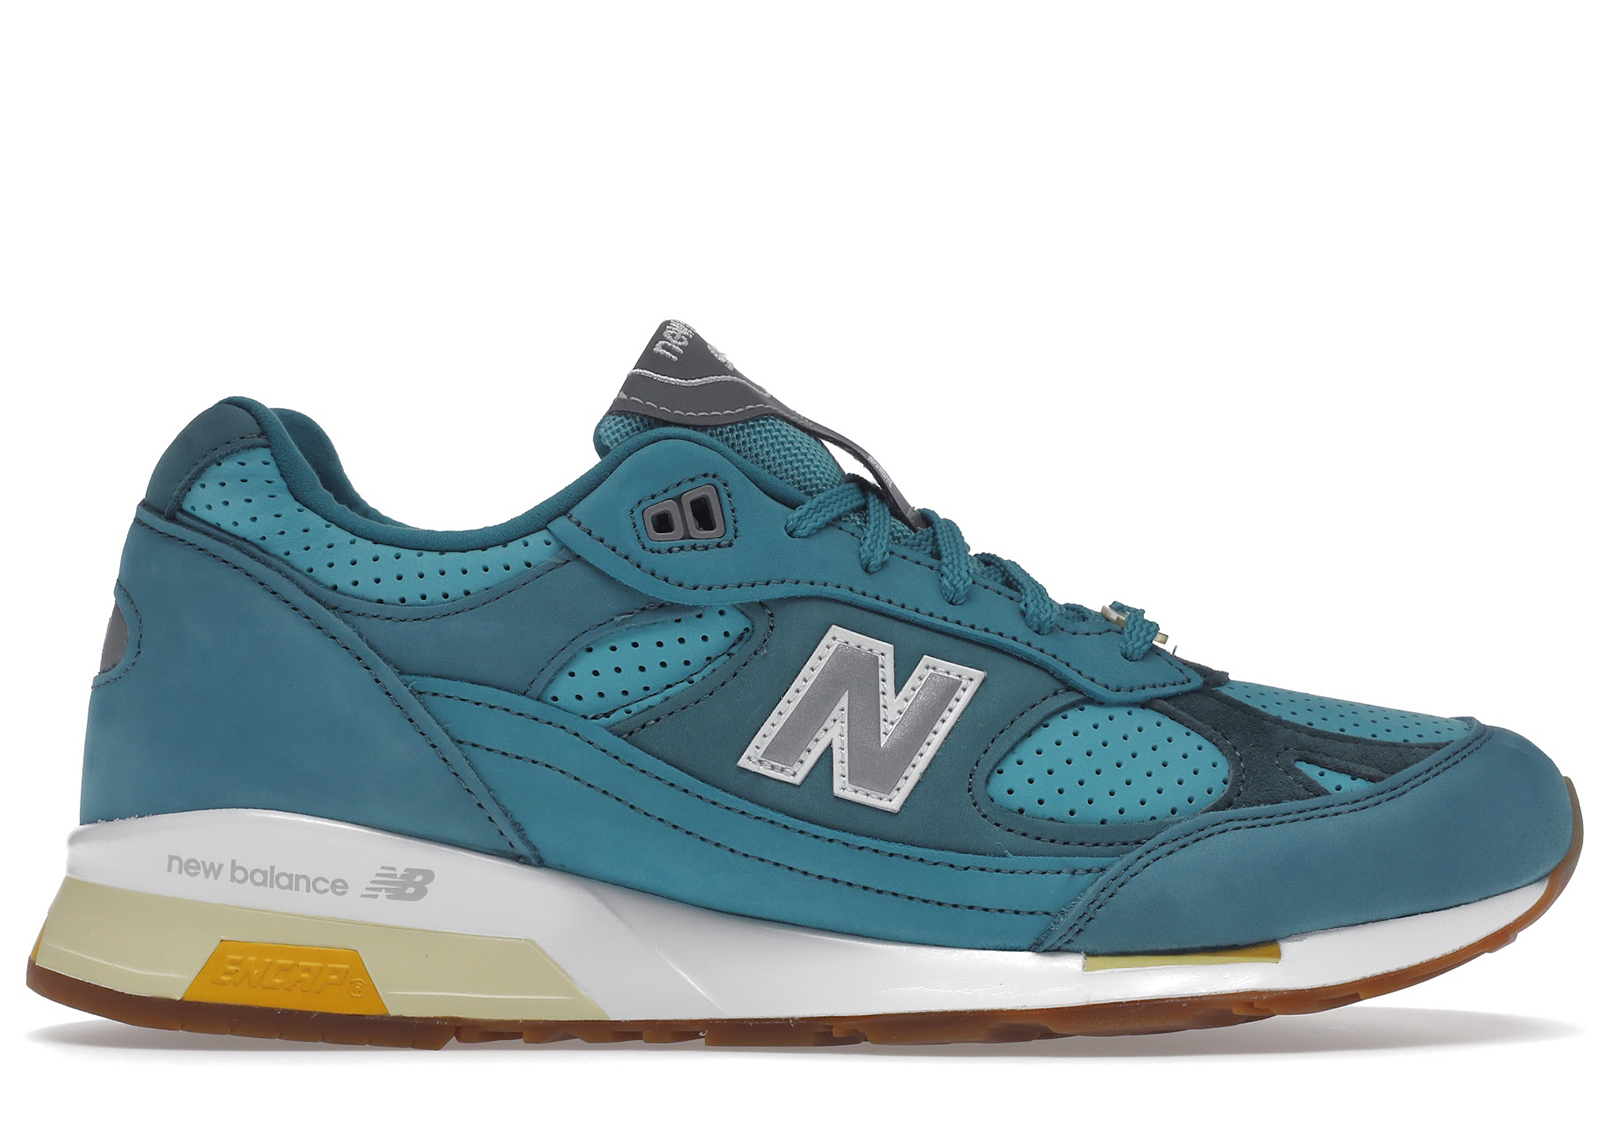 New Balance 991.5 Concepts Teal White メンズ - M9915CNP - JP